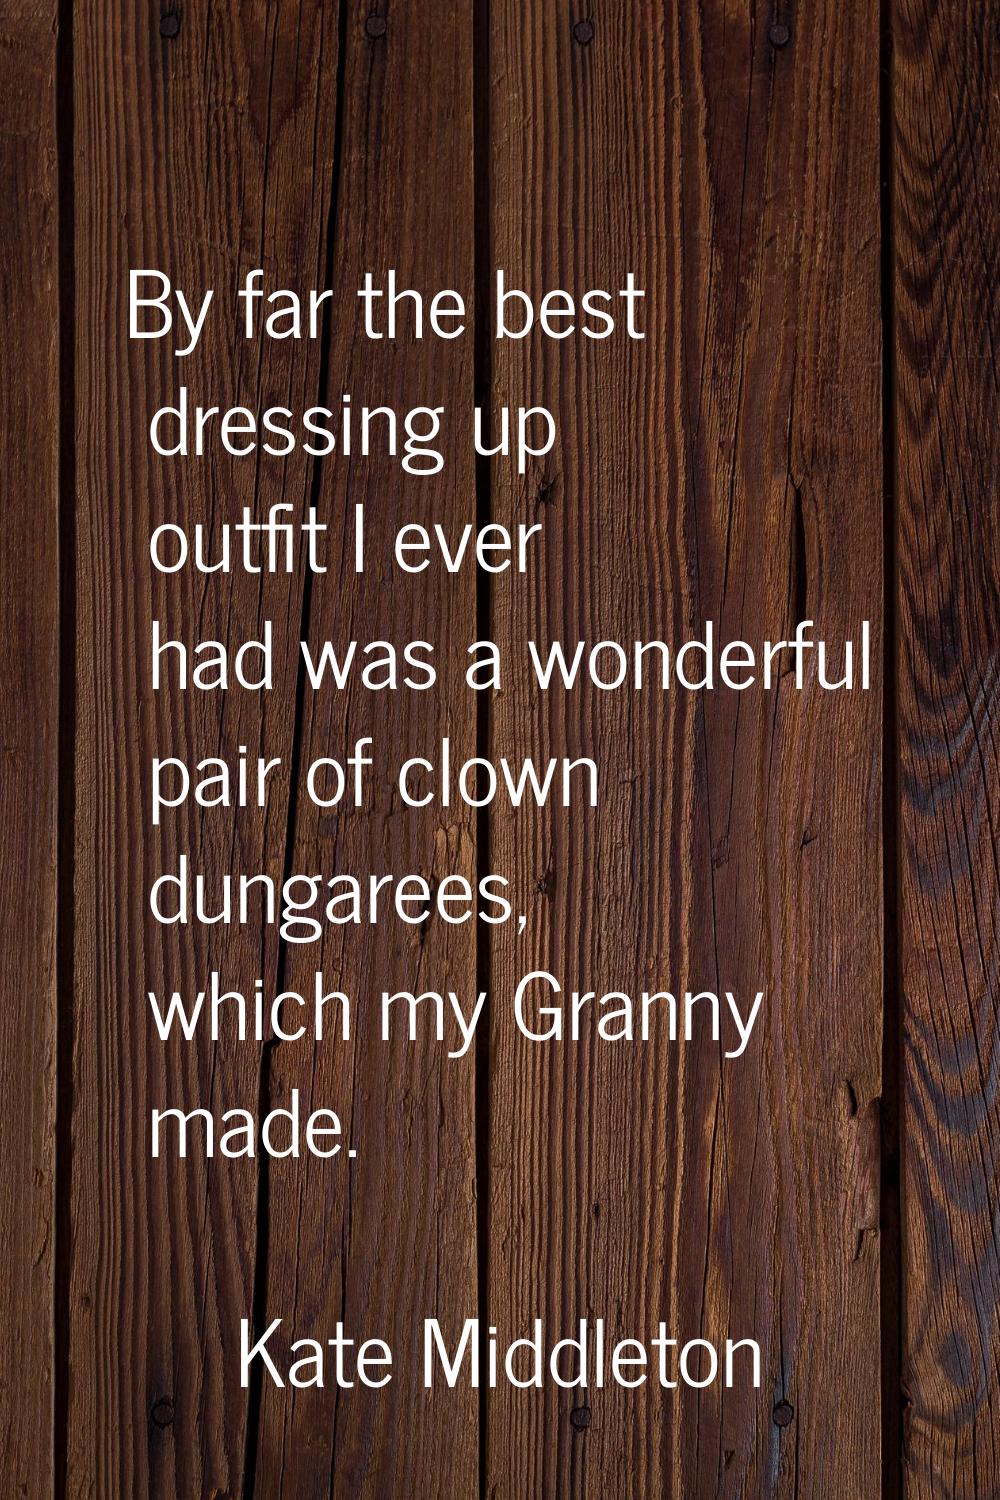 By far the best dressing up outfit I ever had was a wonderful pair of clown dungarees, which my Gra